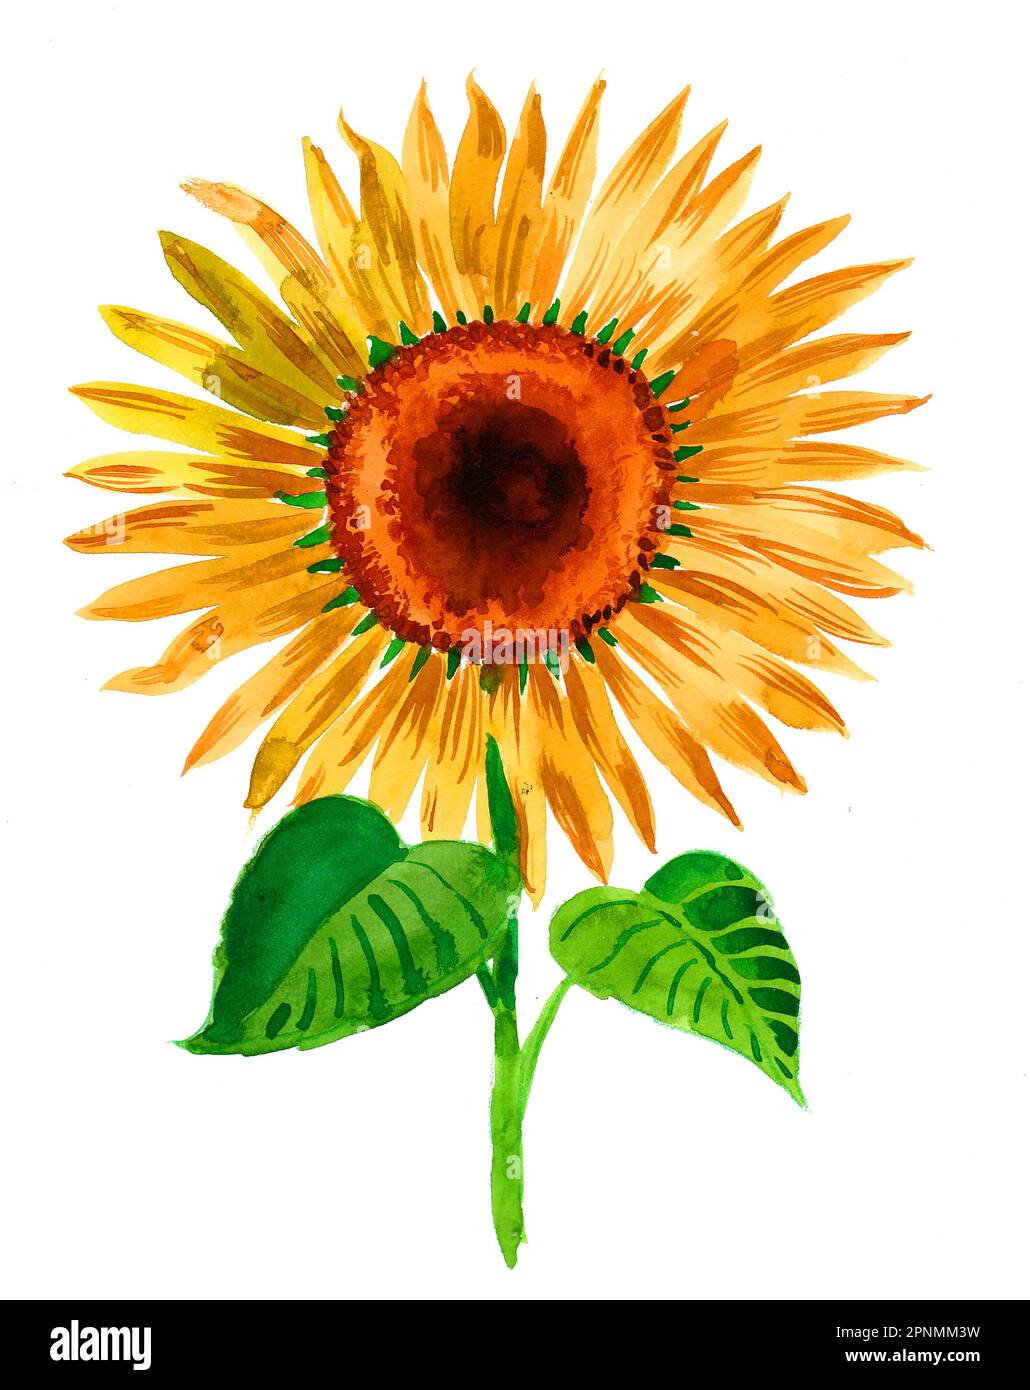 How to Paint a Sunflower: 10 Steps (with Pictures) - wikiHow